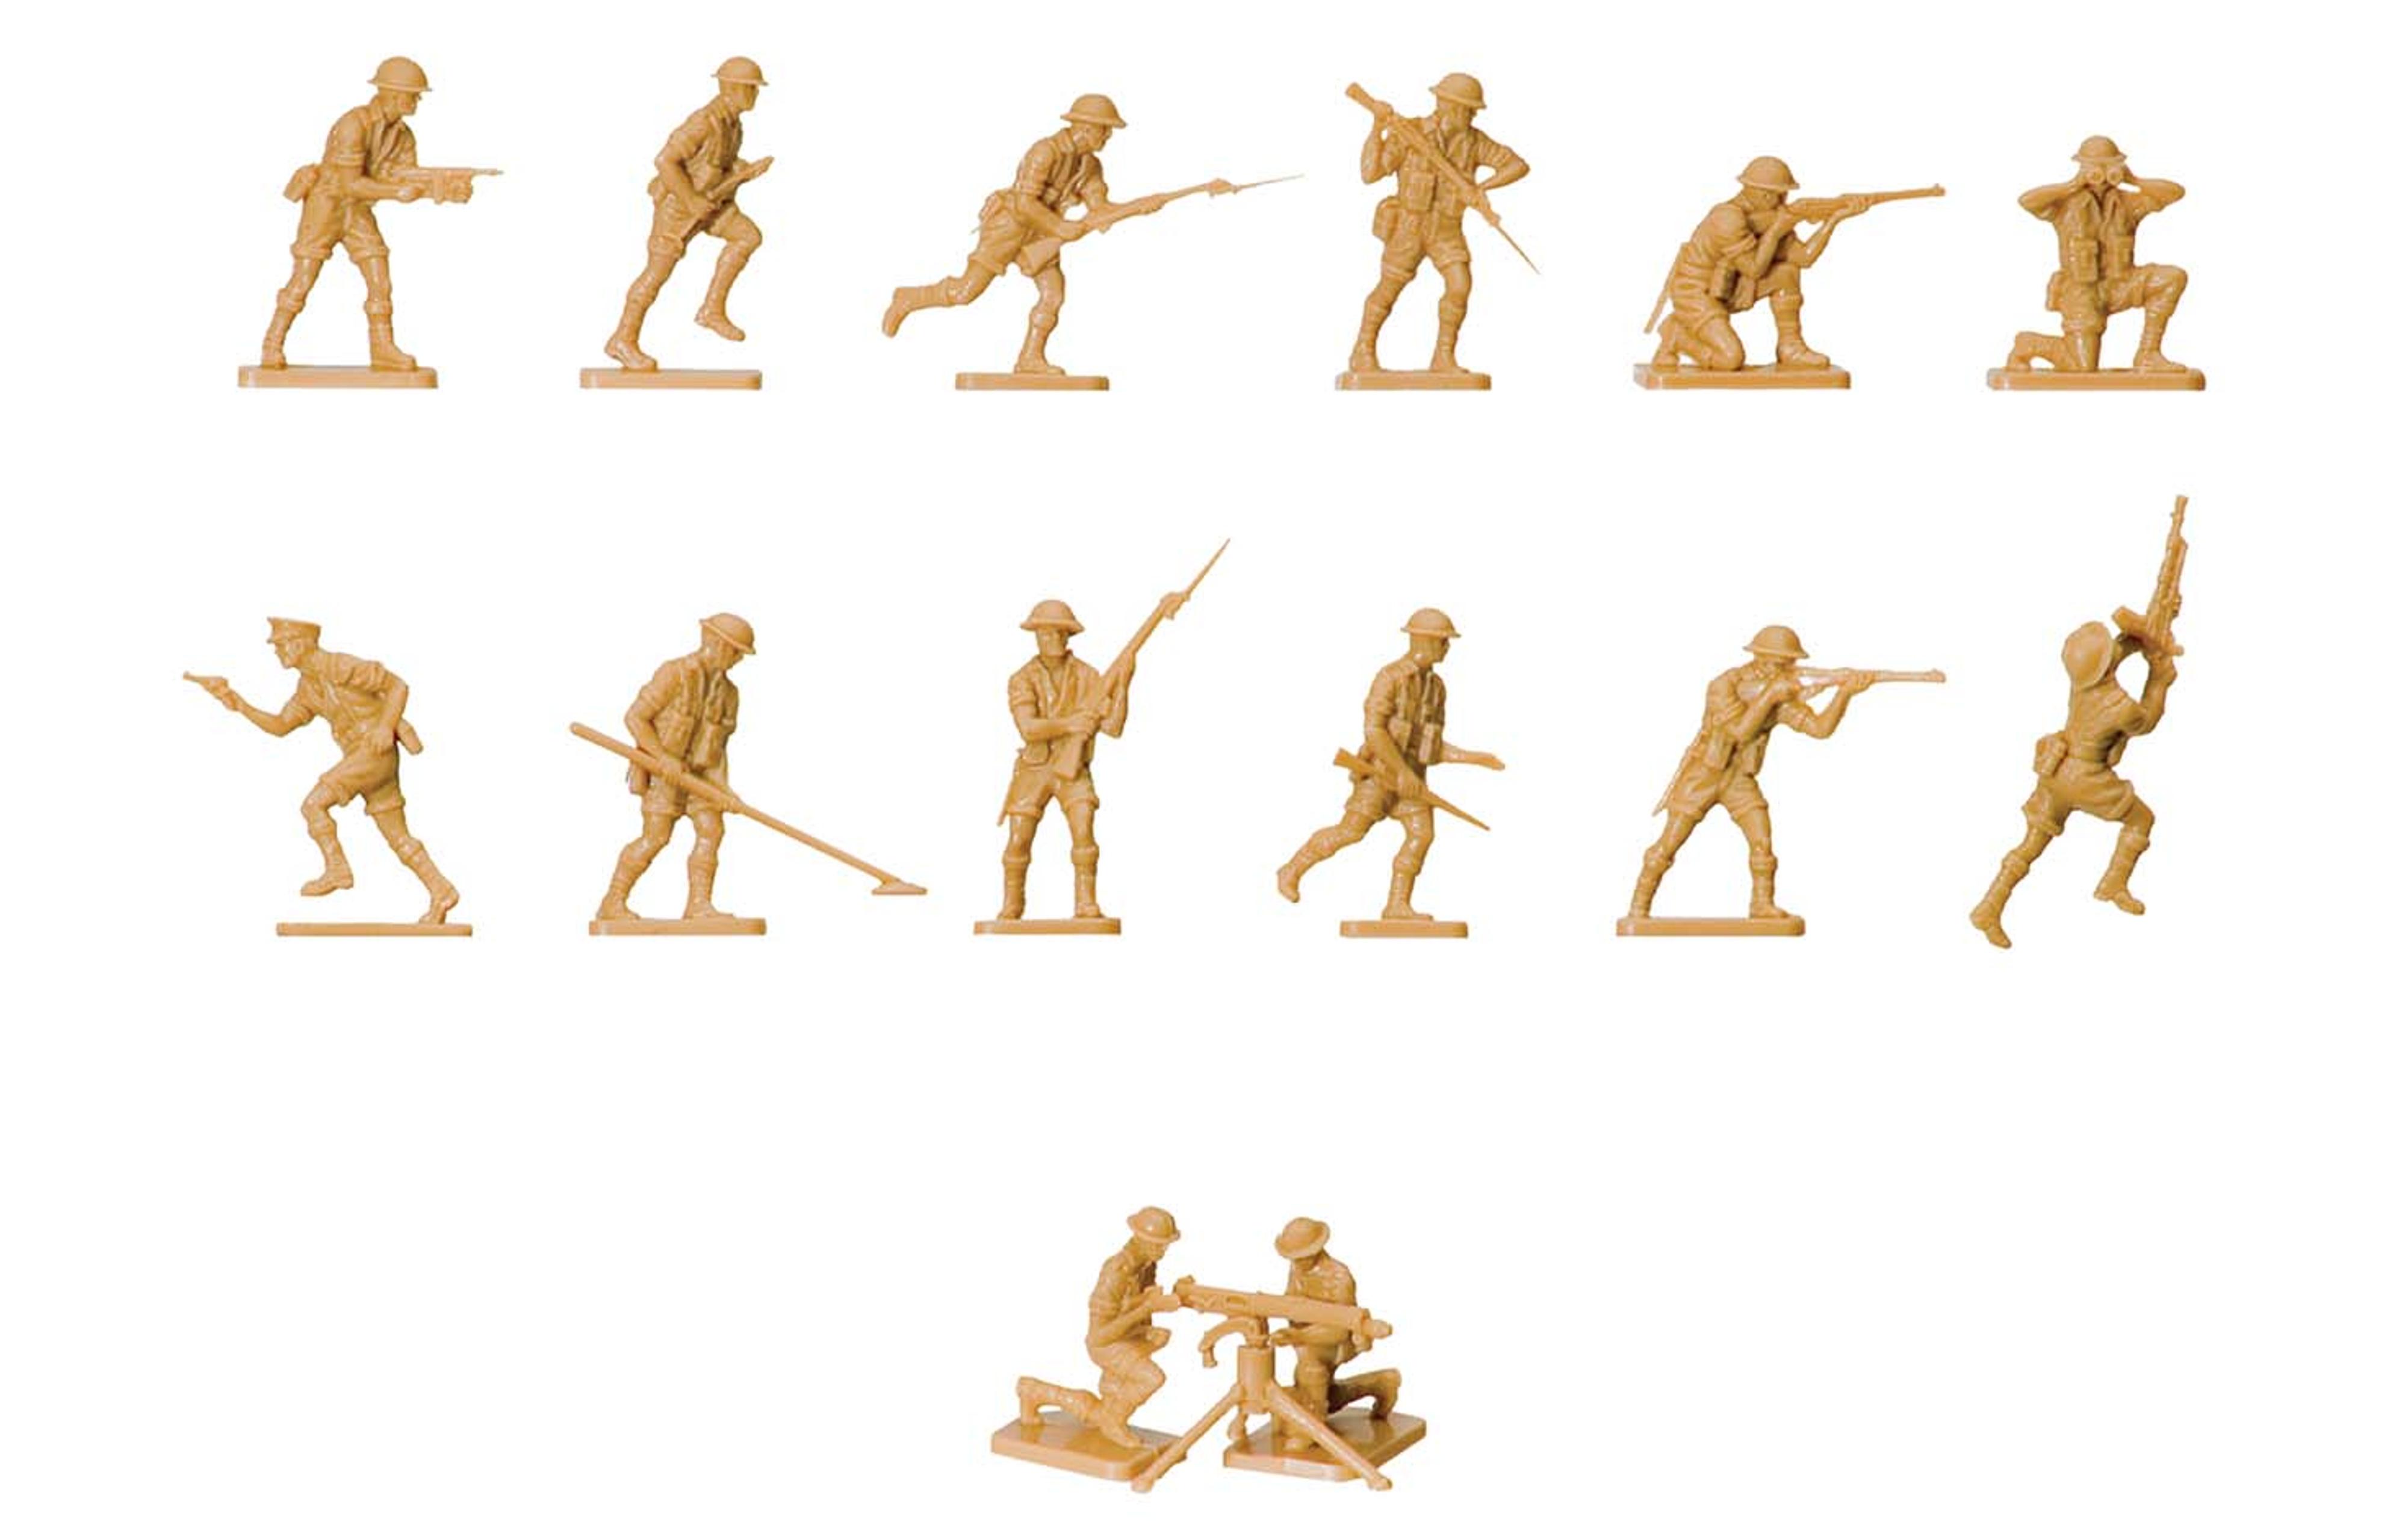 1:76 8th Army Figures (49 ct)